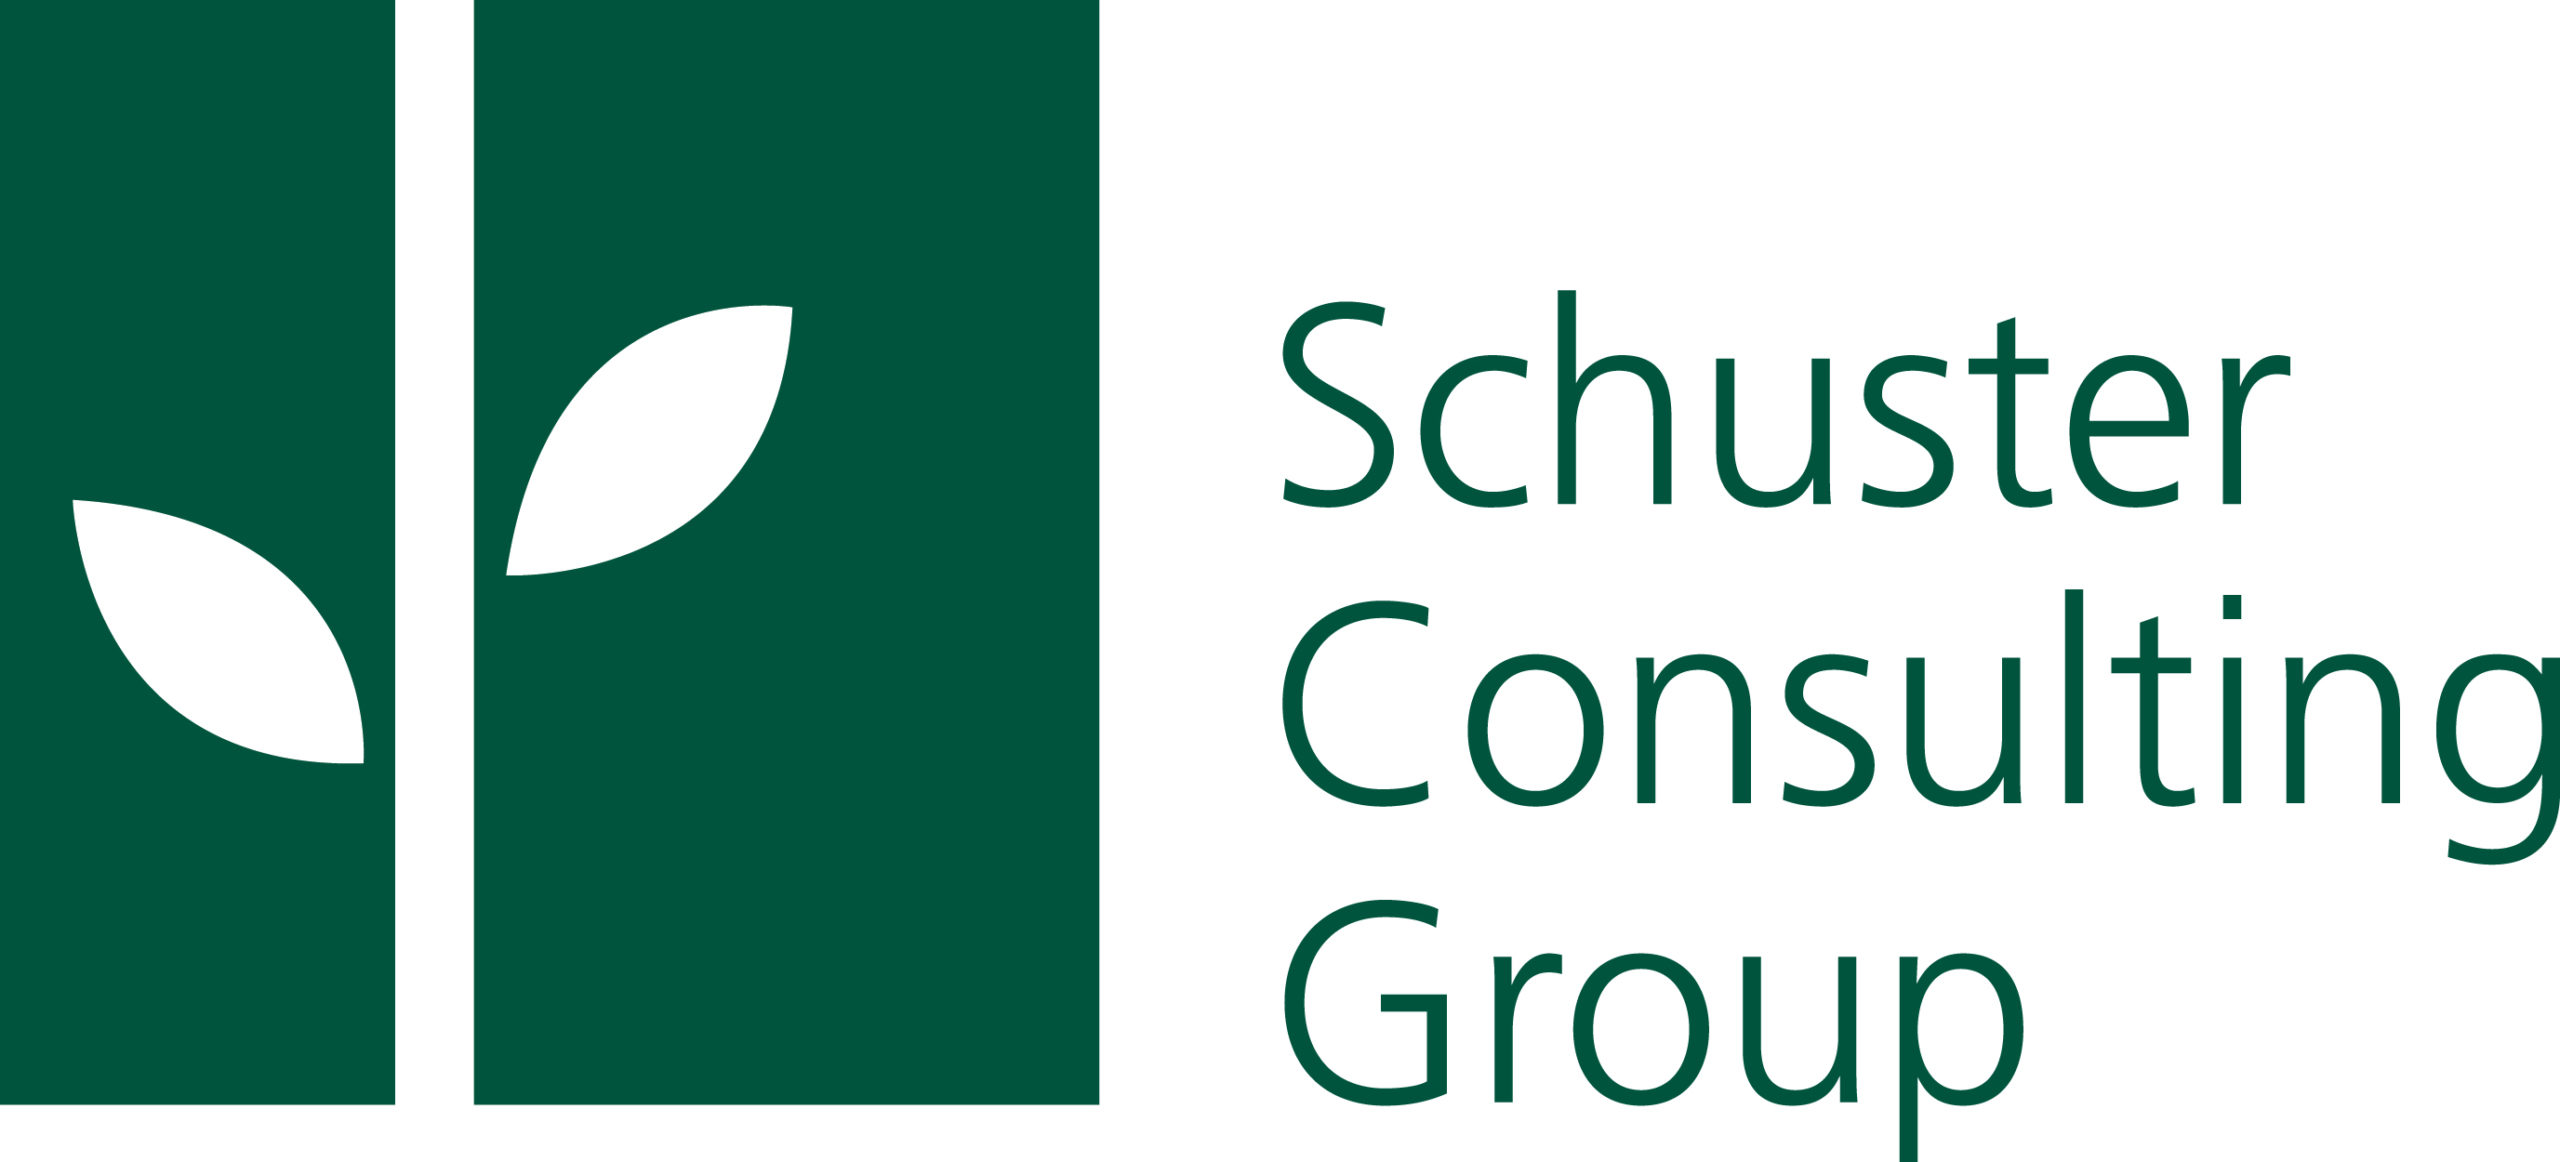 Schuster Consulting Group